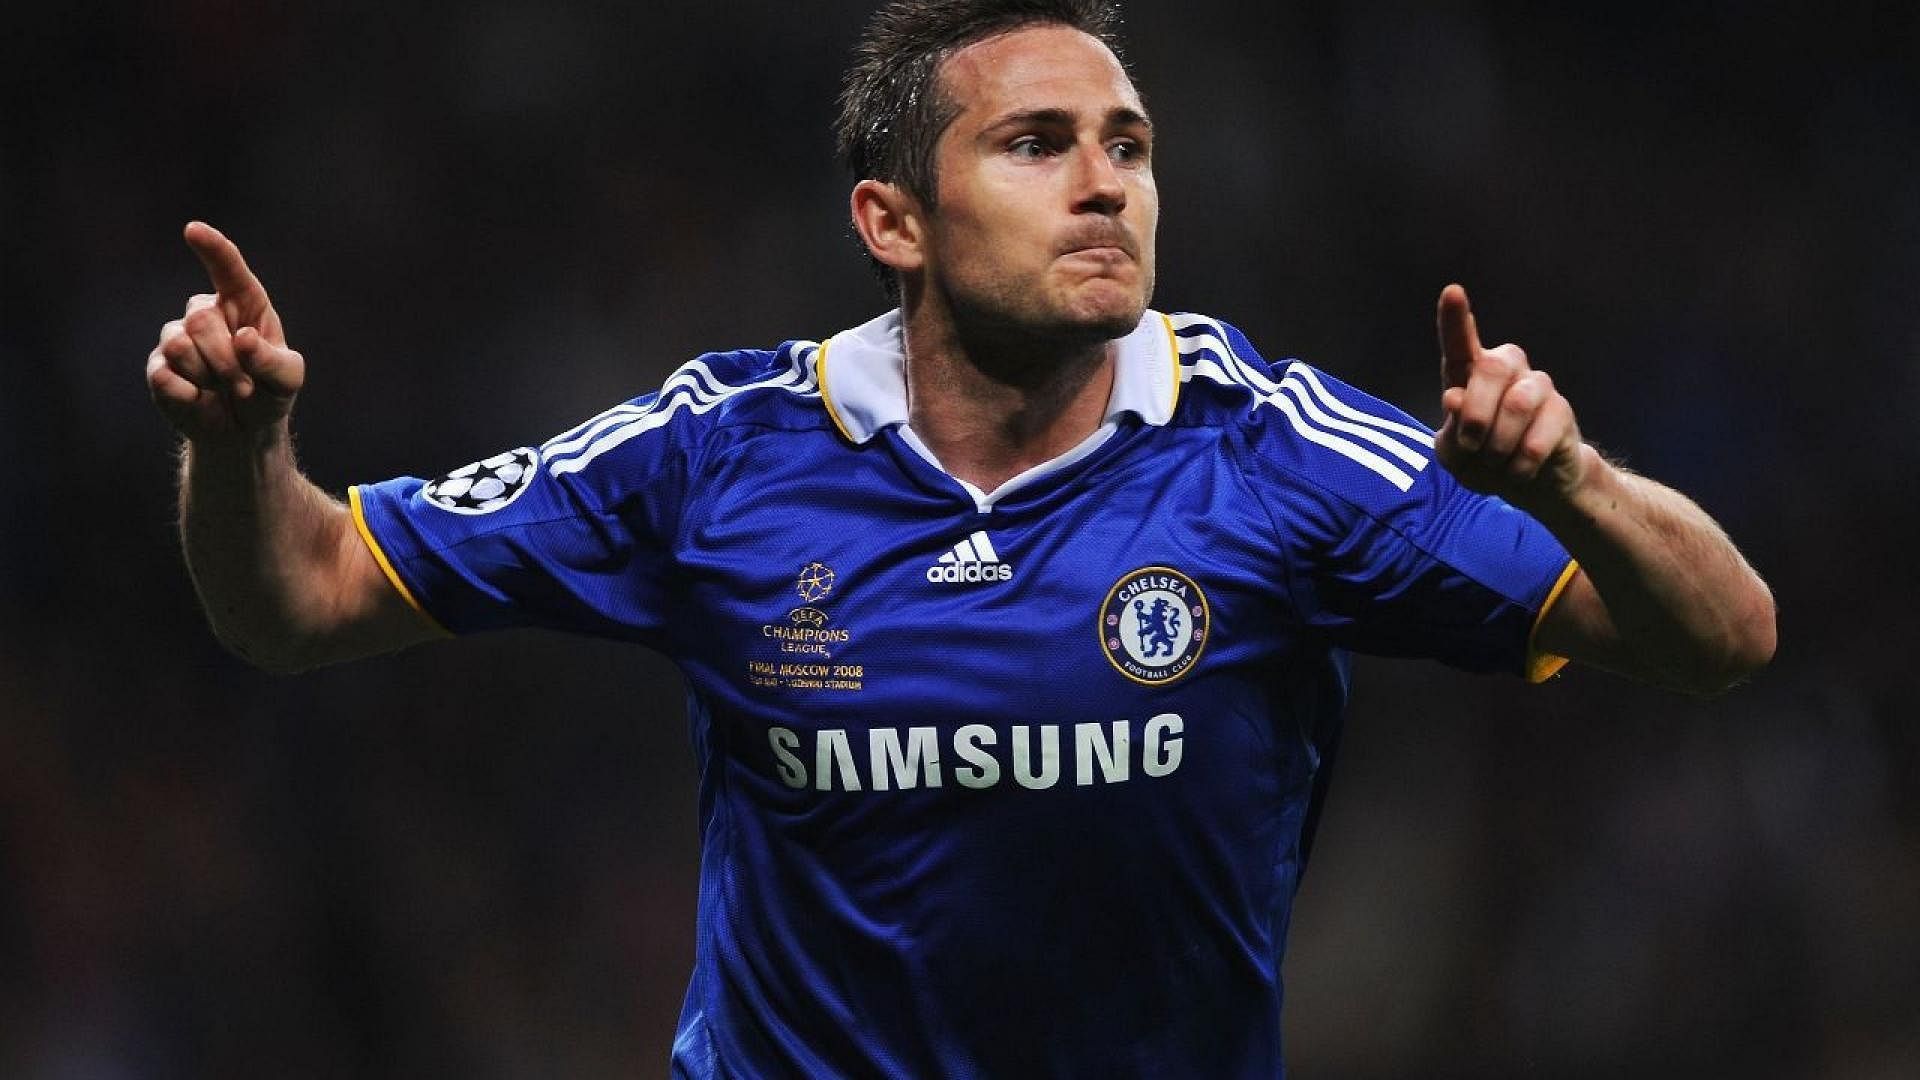 Frank Lampard finished second in 2005.